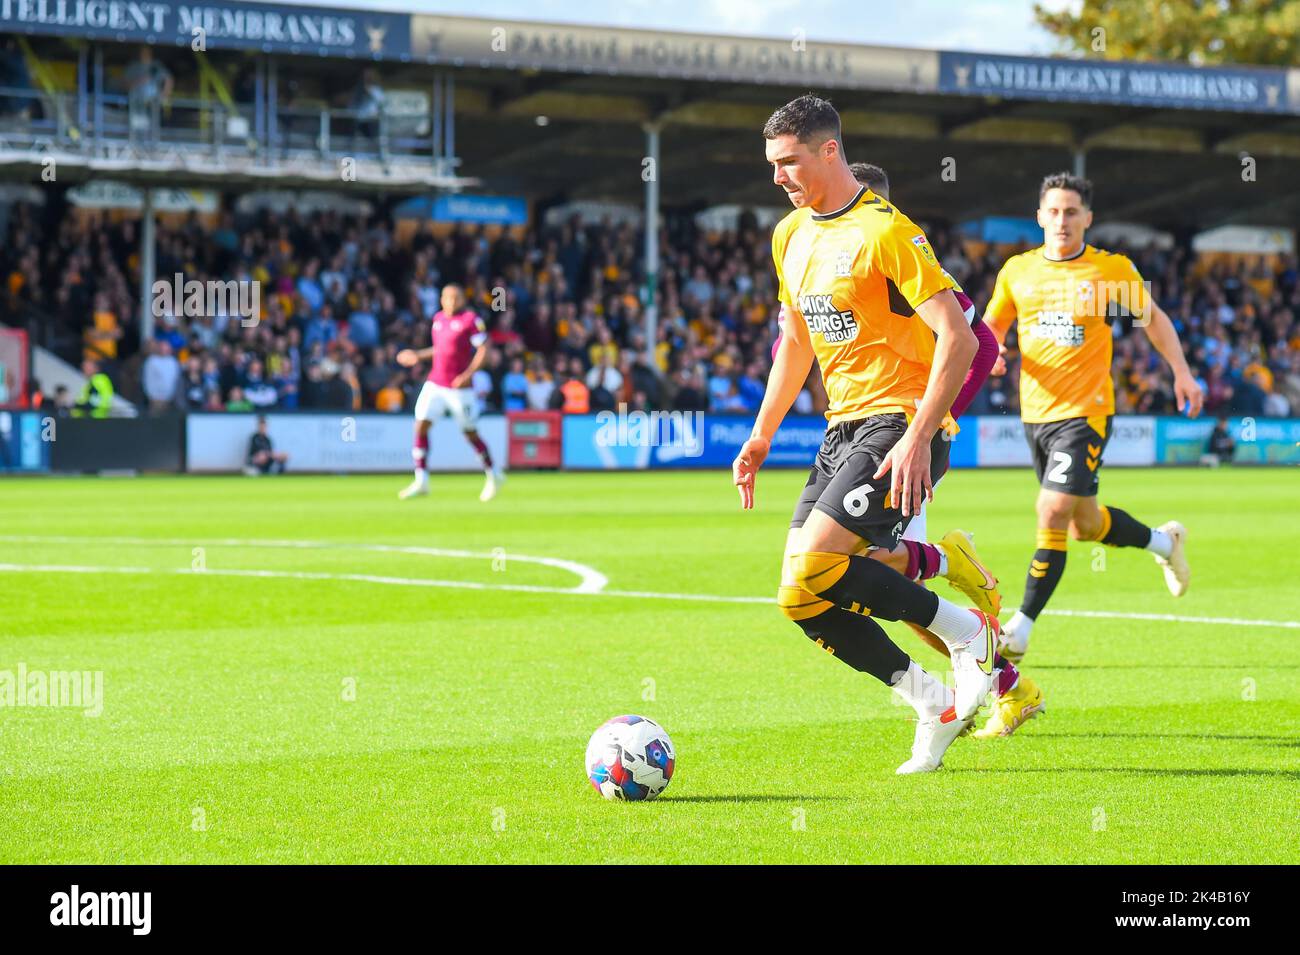 Cambridge, UK. 1st October 2022Llyod Jones (6 Cambridge United) controls the ball during the Sky Bet League 1 match between Cambridge United and Derby County at the R Costings Abbey Stadium, Cambridge on Saturday 1st October 2022. (Credit: Kevin Hodgson | MI News) Credit: MI News & Sport /Alamy Live News Stock Photo